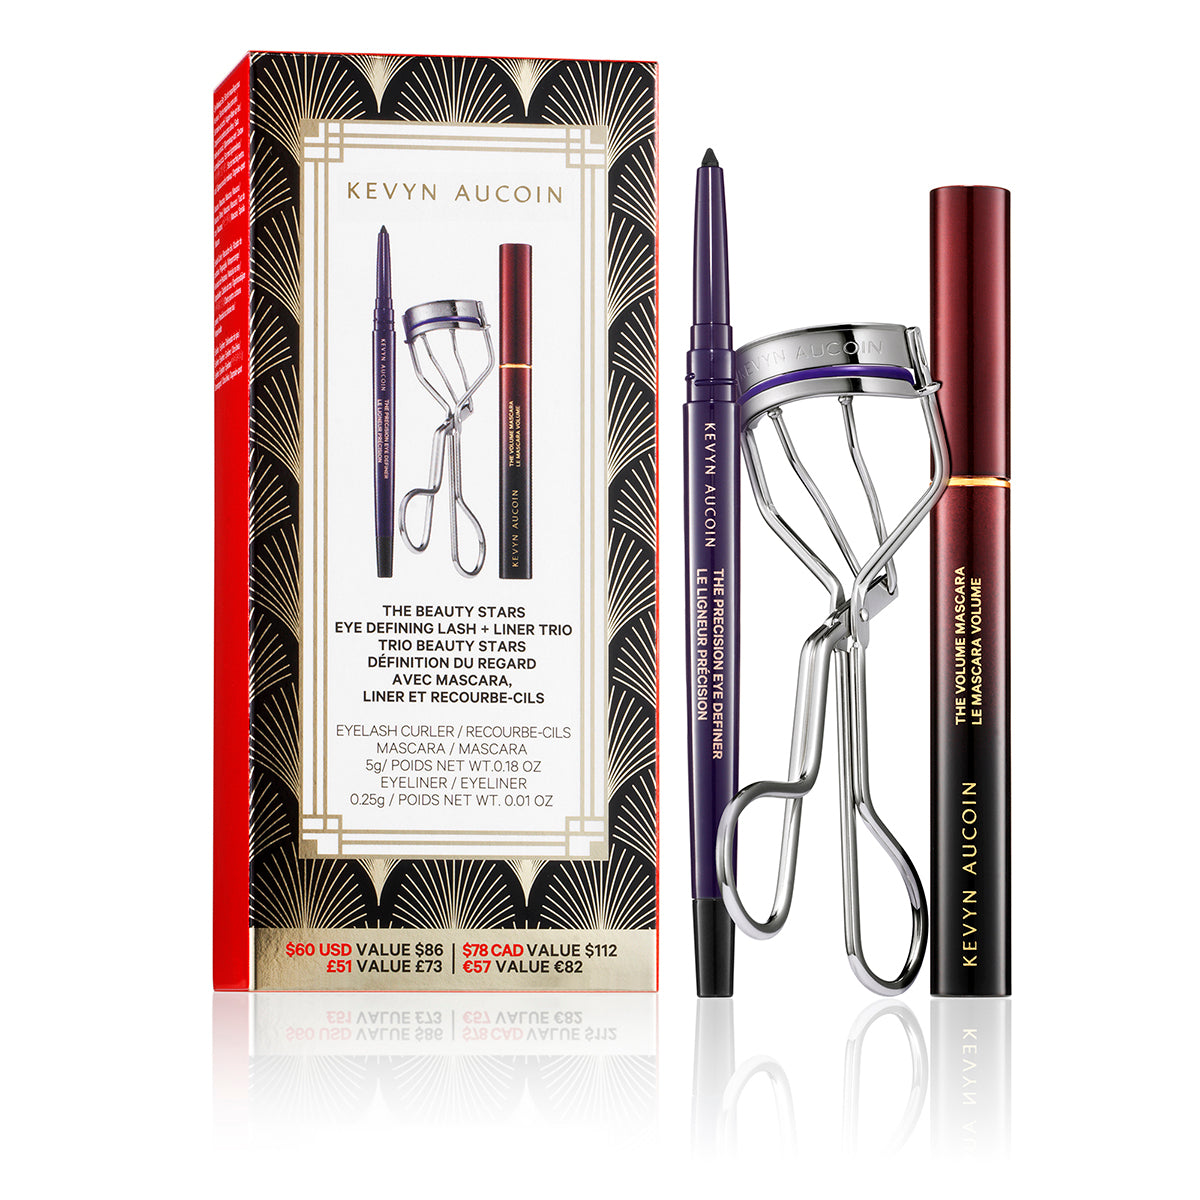 Image of The Beauty Stars: Eye Defining Lash + Liner Trio ($86 Value)